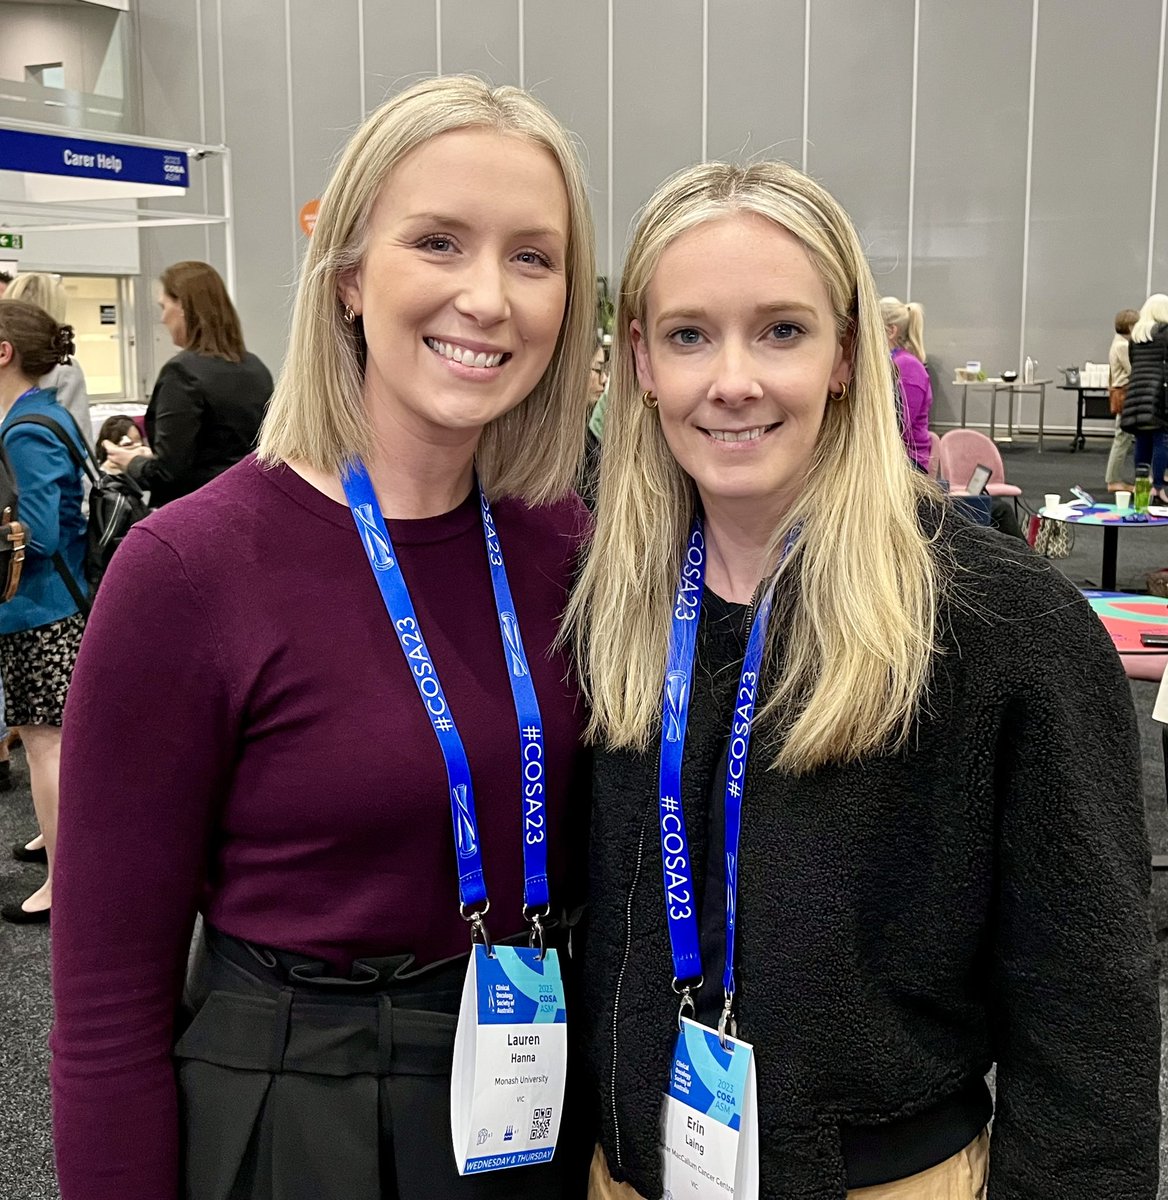 I’ve known @ErinLaing_Diet for almost 20 years, but #COSA23 is our very first conference together! From uni days at @Deakin, to new grad dietitians @PeninsulaHealth, and now postdoctoral research in #cancer #nutrition, I’m so grateful for our friendship! 😍